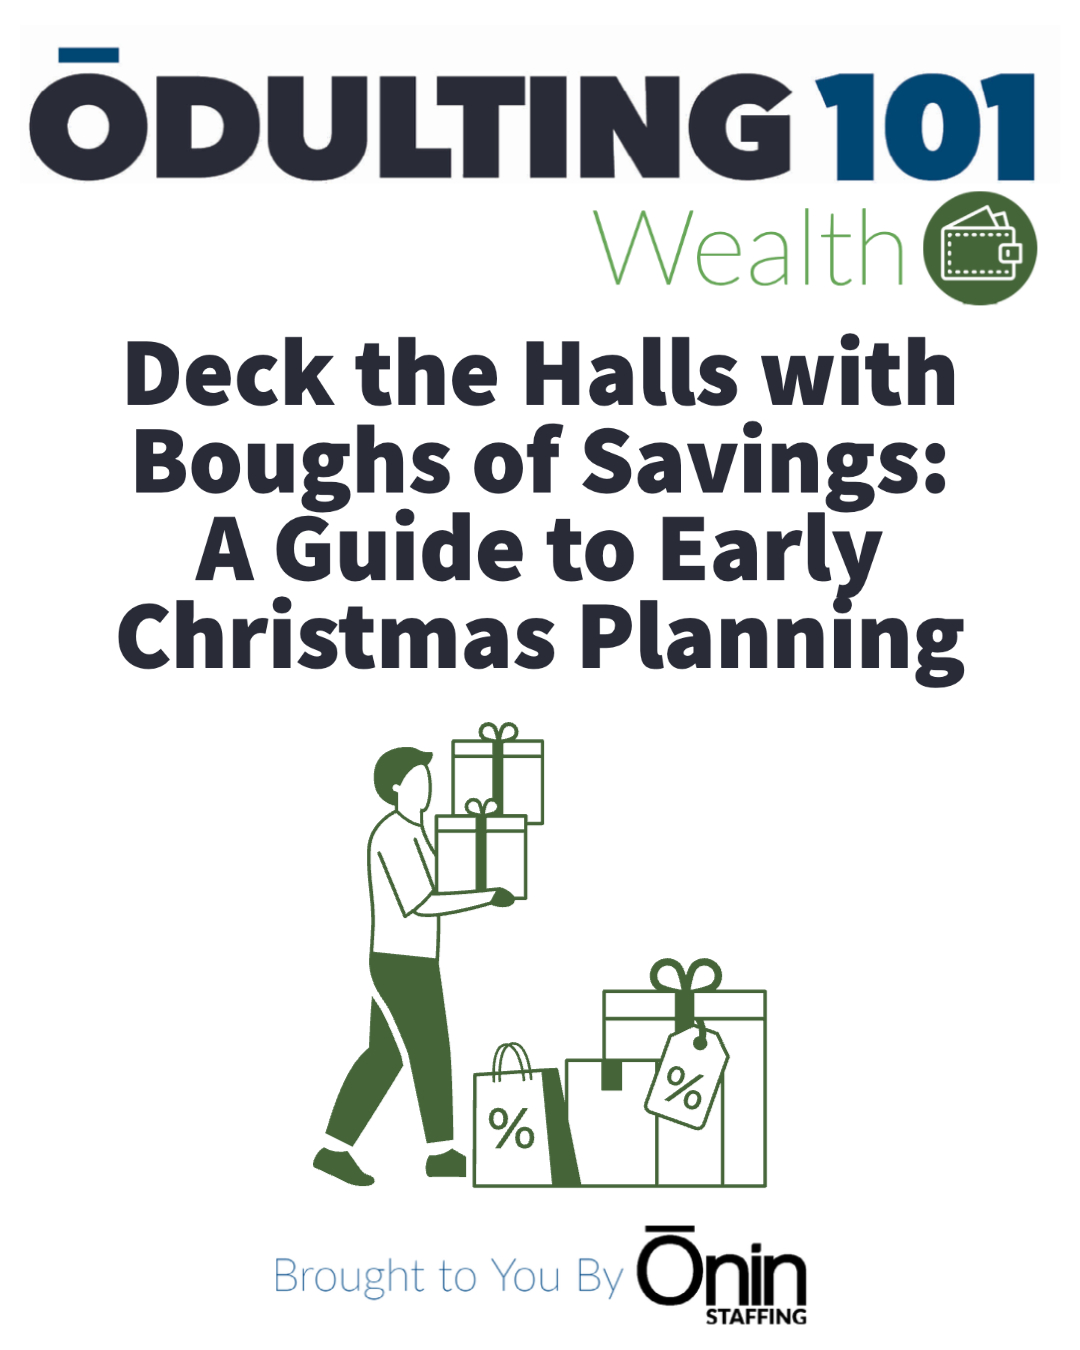 Odulting Wealth series image with a line drawing of a man holding discounted presents, text 'Deck the Halls with Boughs of Savings: A Guide to Early Christmas Planning', presented by Onin Staffing.